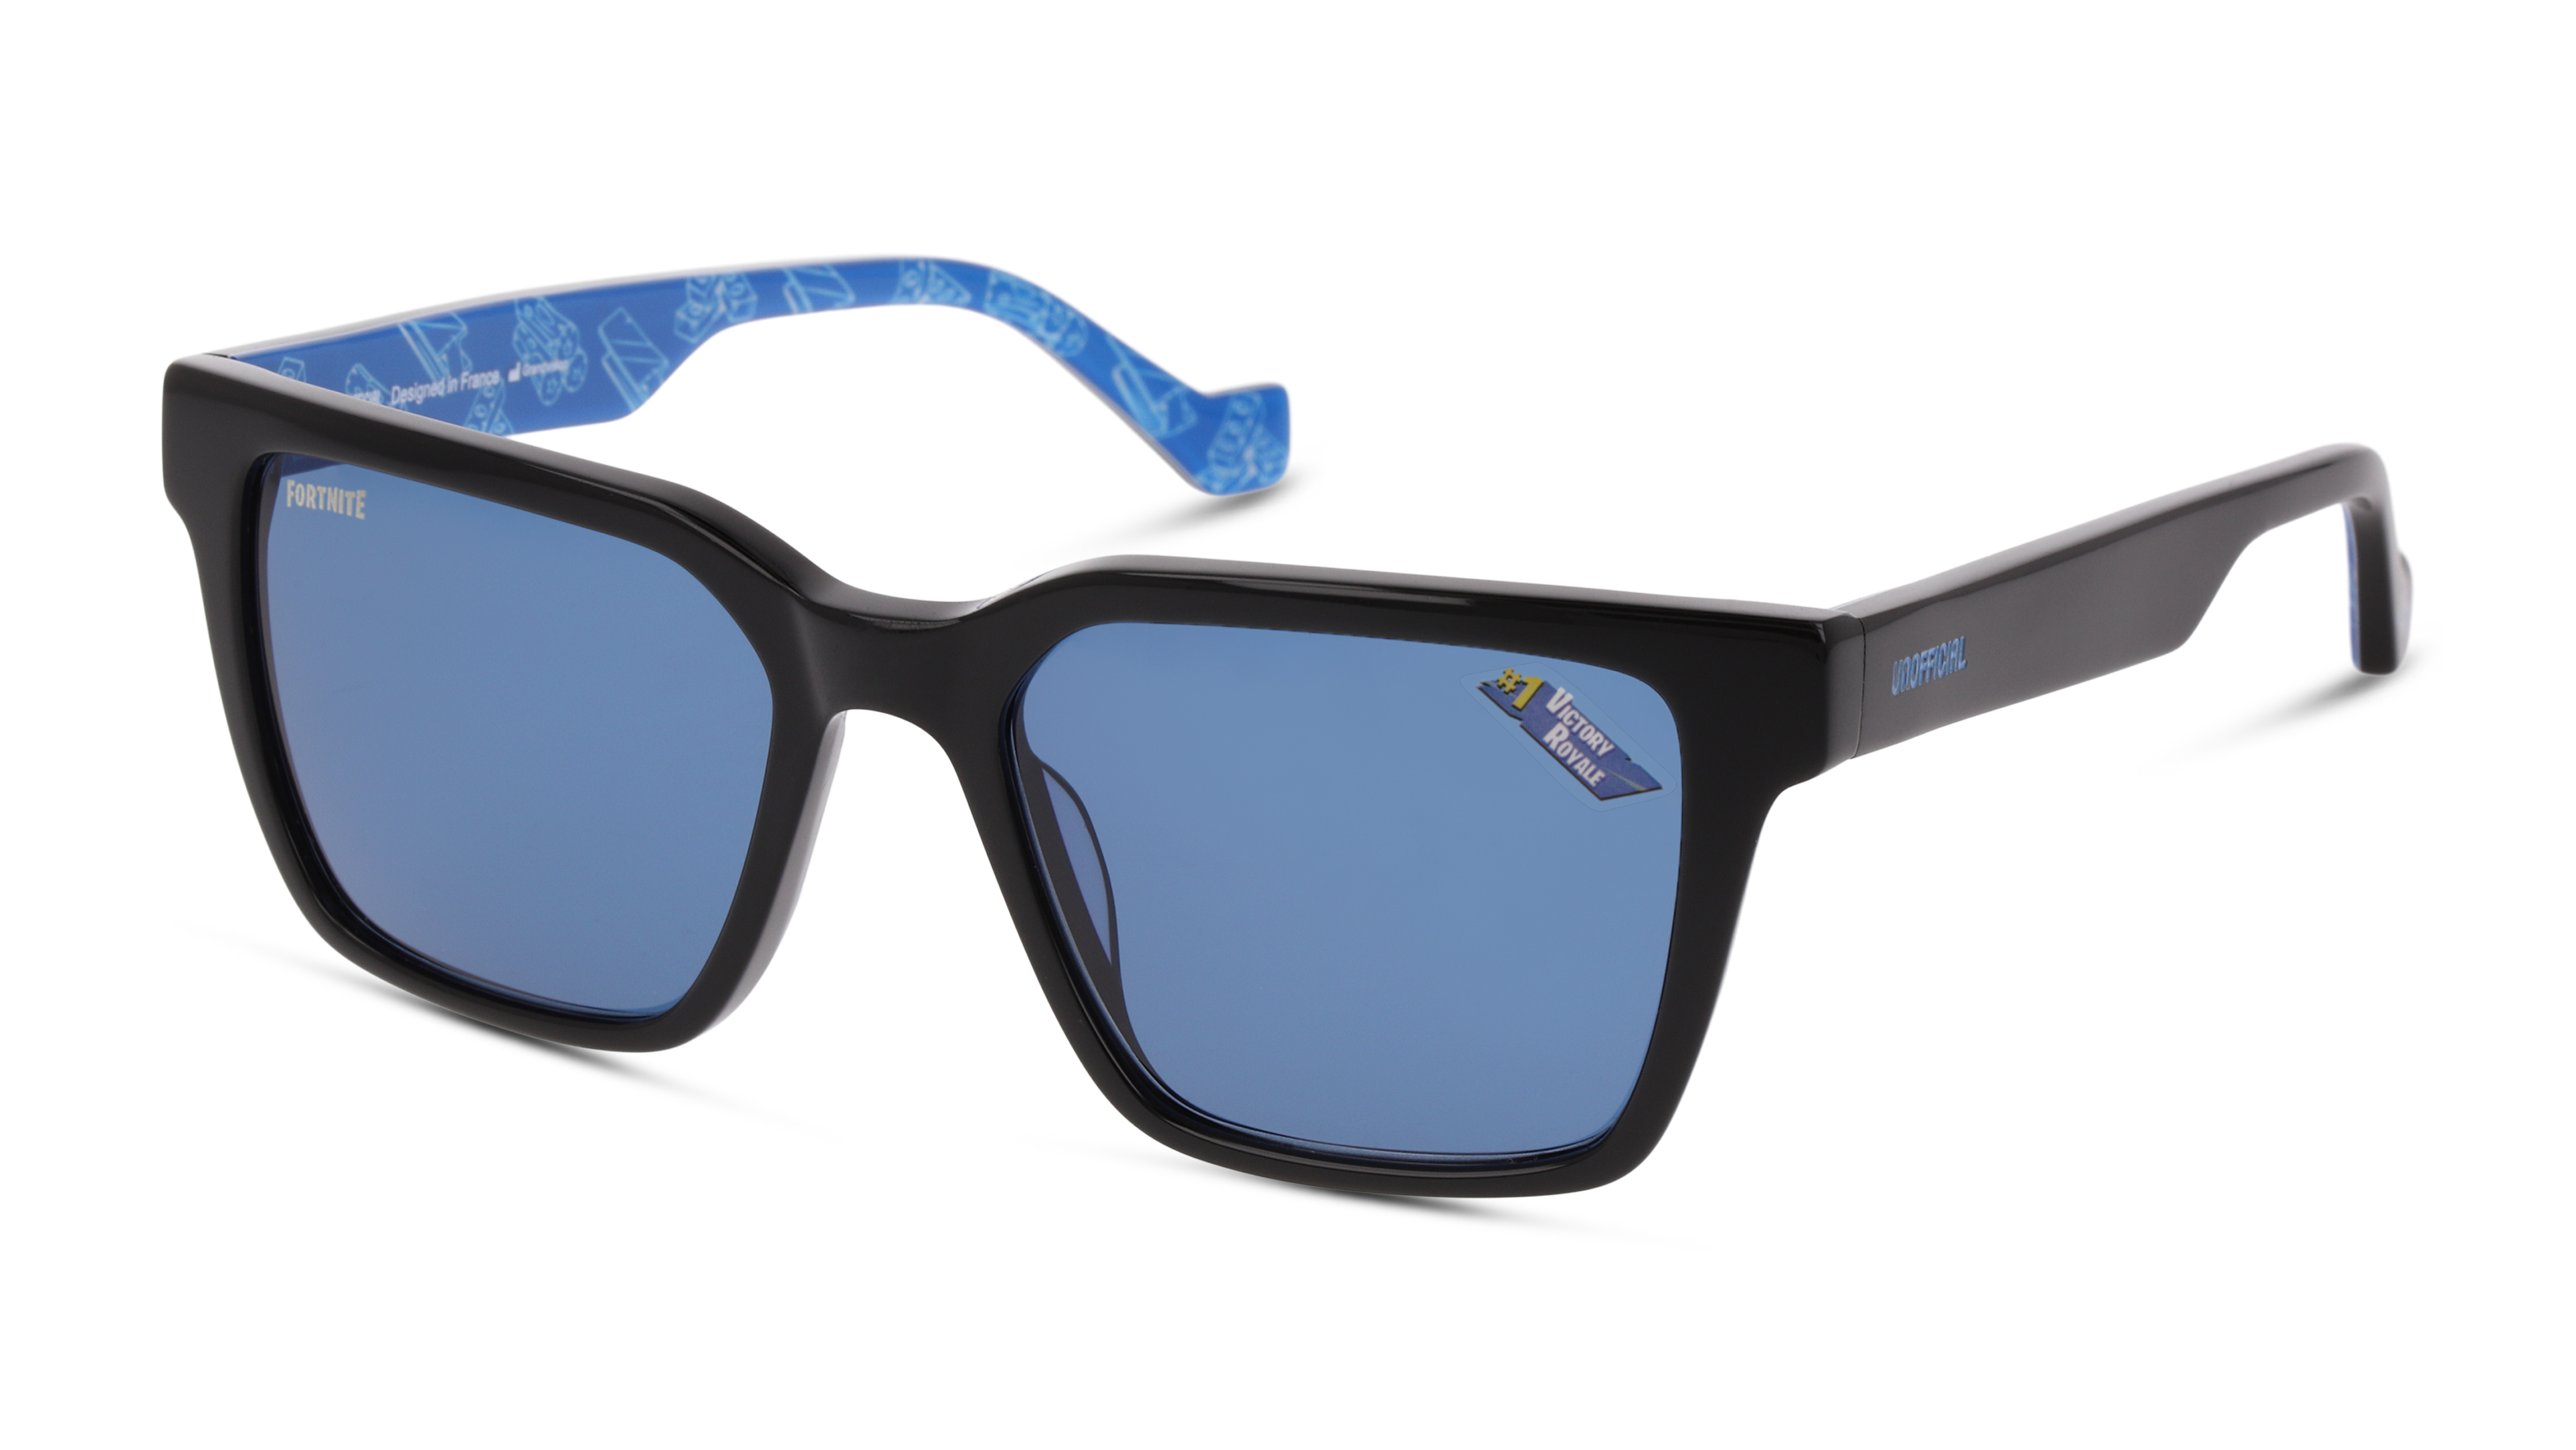 Angle_Left01 Fortnite with Unofficial UNSU0128 Sunglasses Blue / Black